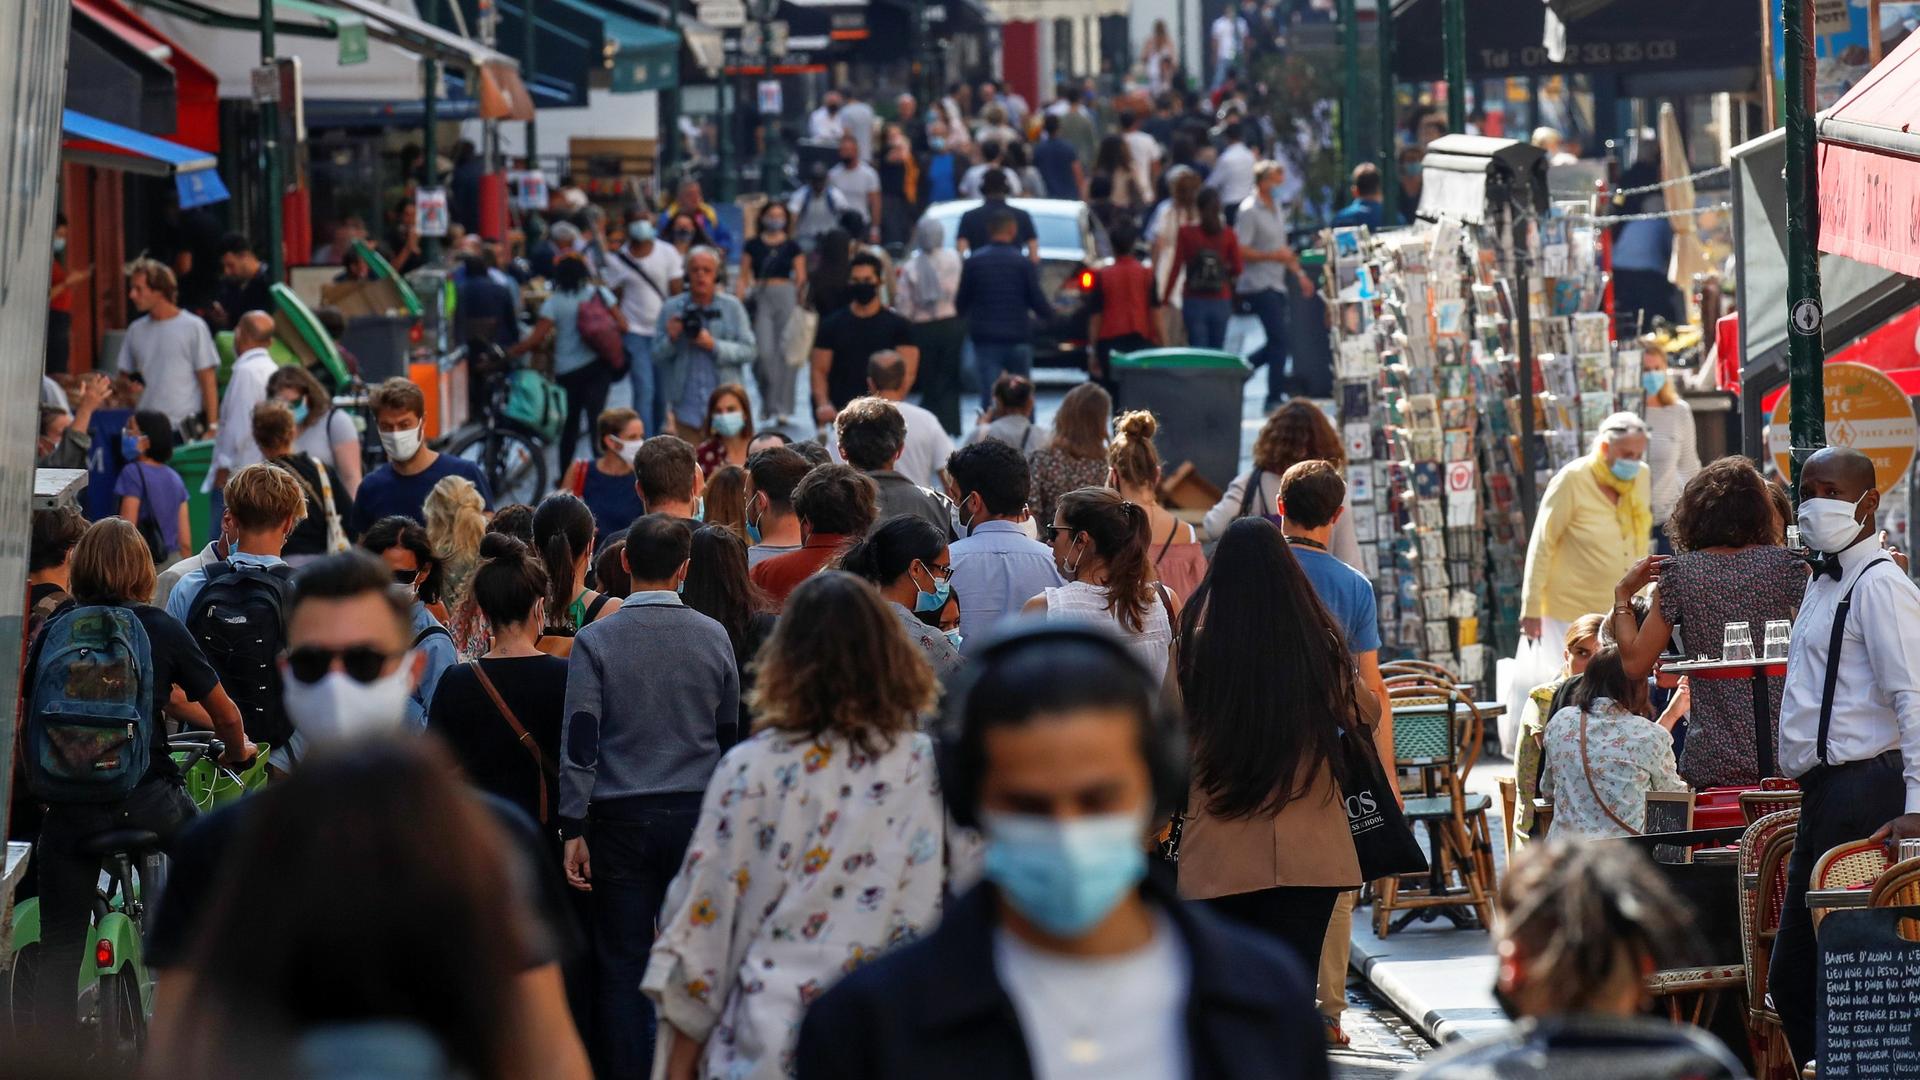 People wearing protective face masks walk in a busy street in Paris as France reinforces mask-wearing in public places as part of efforts to curb a resurgence of the coronavirus disease (COVID-19) across Europe, Sept. 18, 2020.